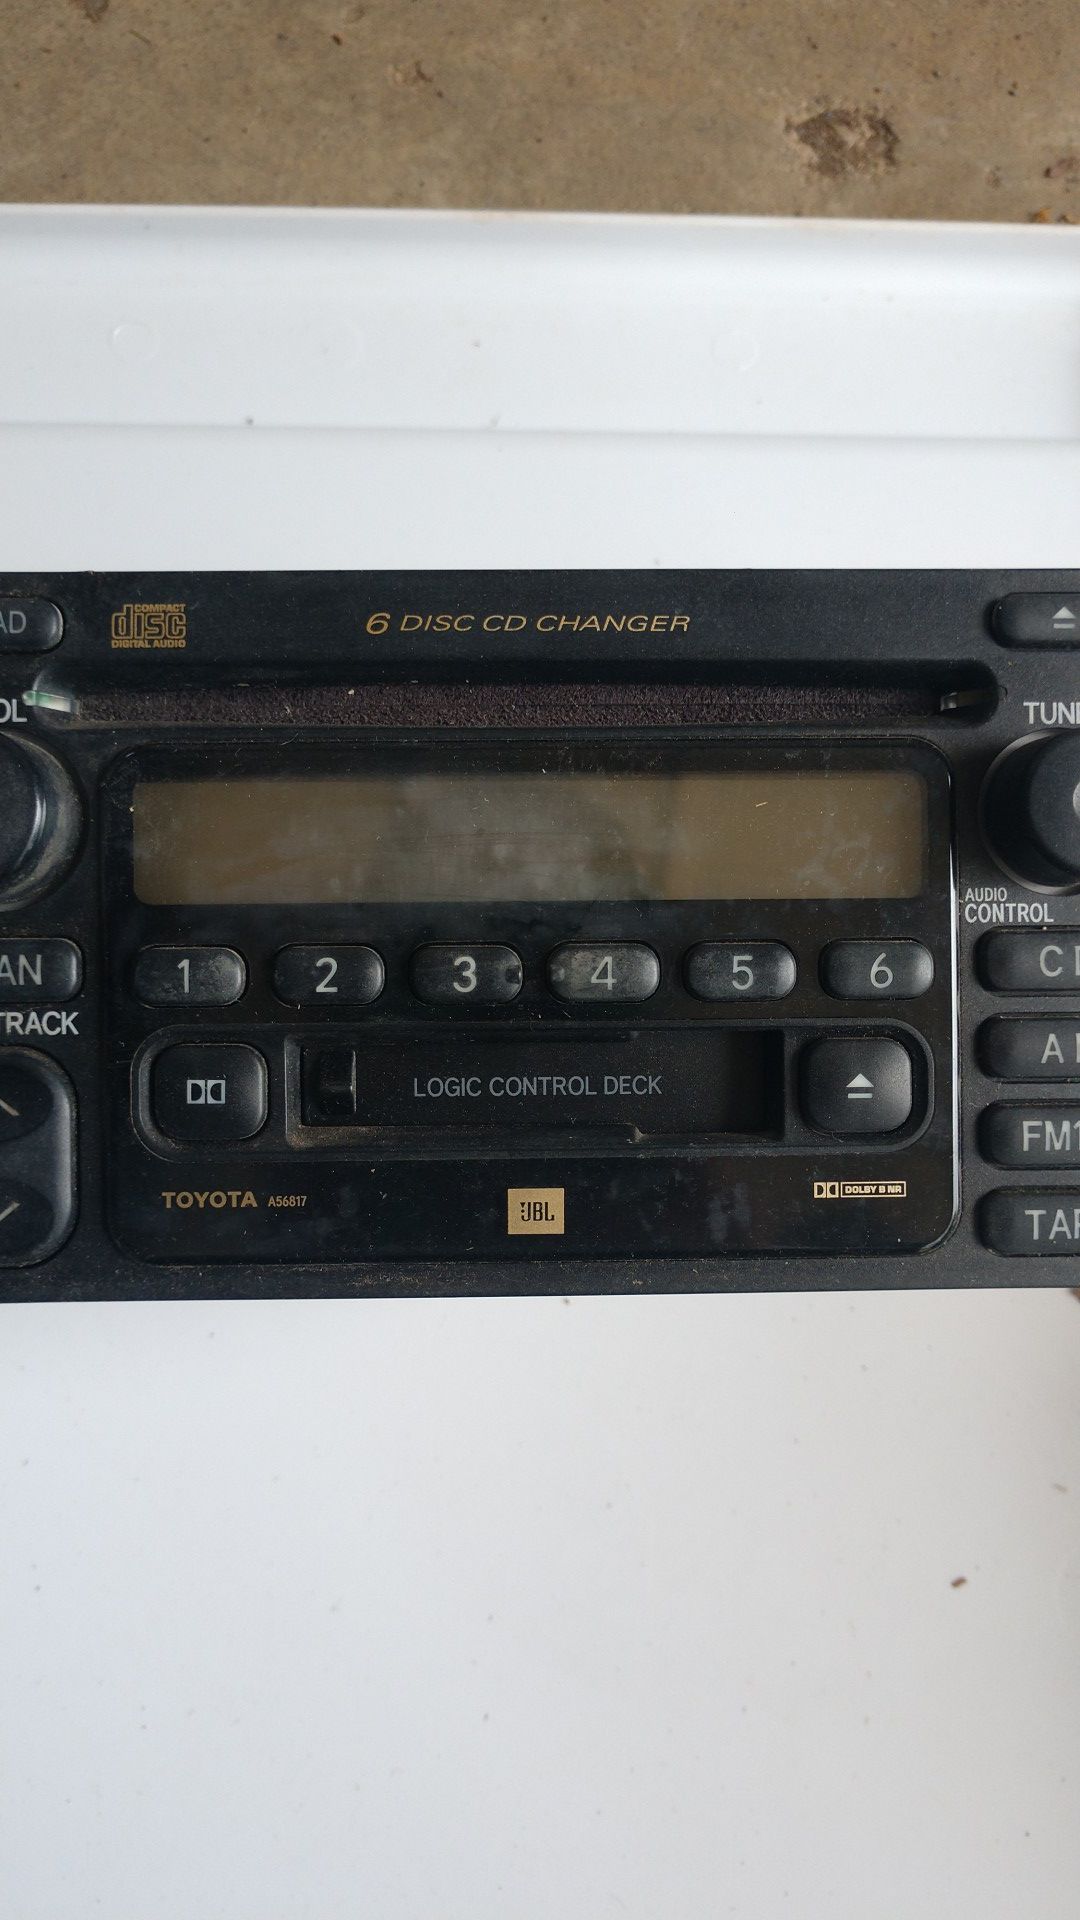 Toyota tundra or Sequoia stereo